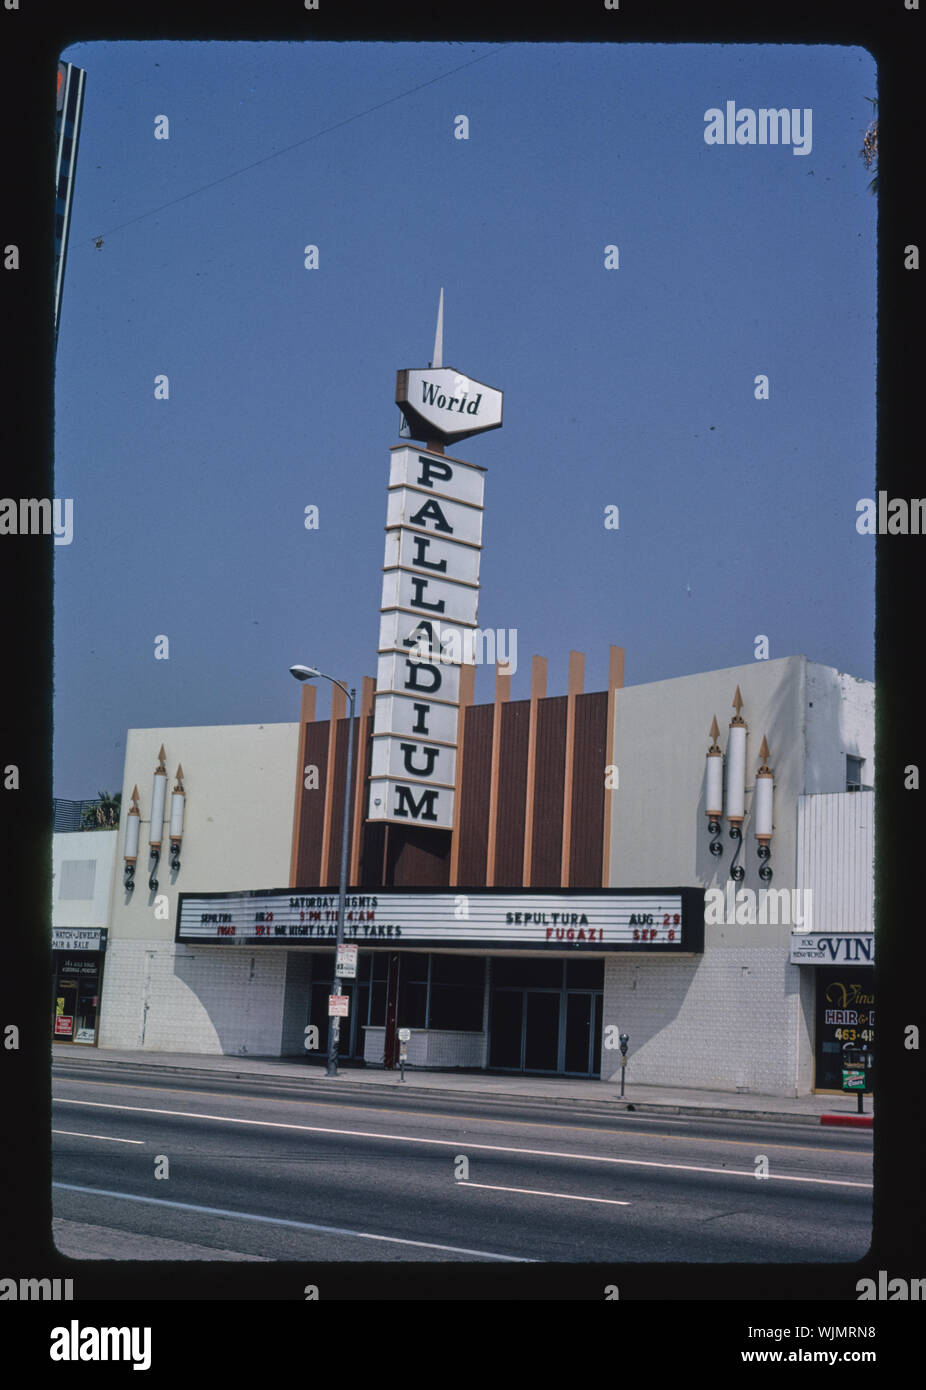 Hollywood Palladium, Hollywood, Californie Banque D'Images